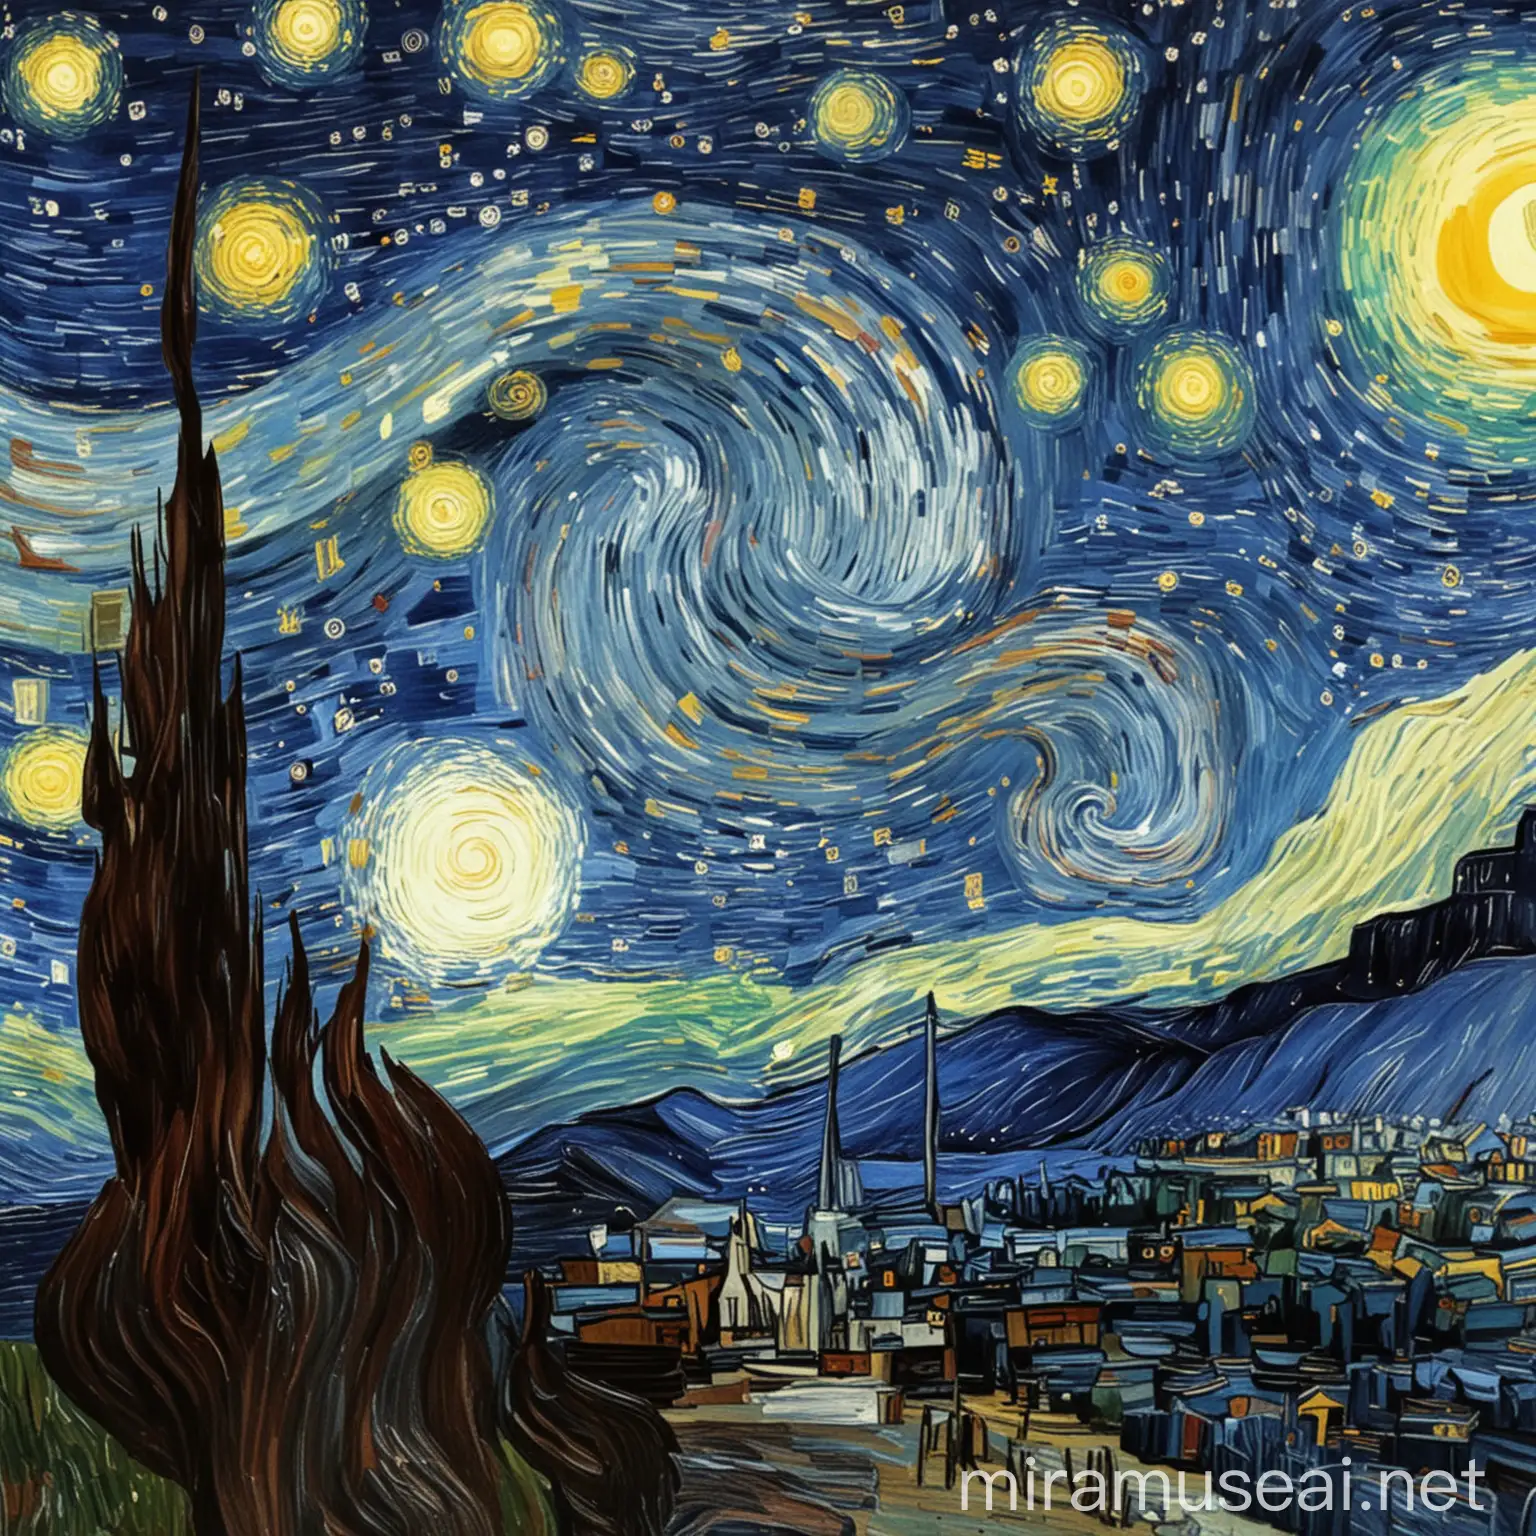 create a starry night by vincent van gogh planet Mars version
